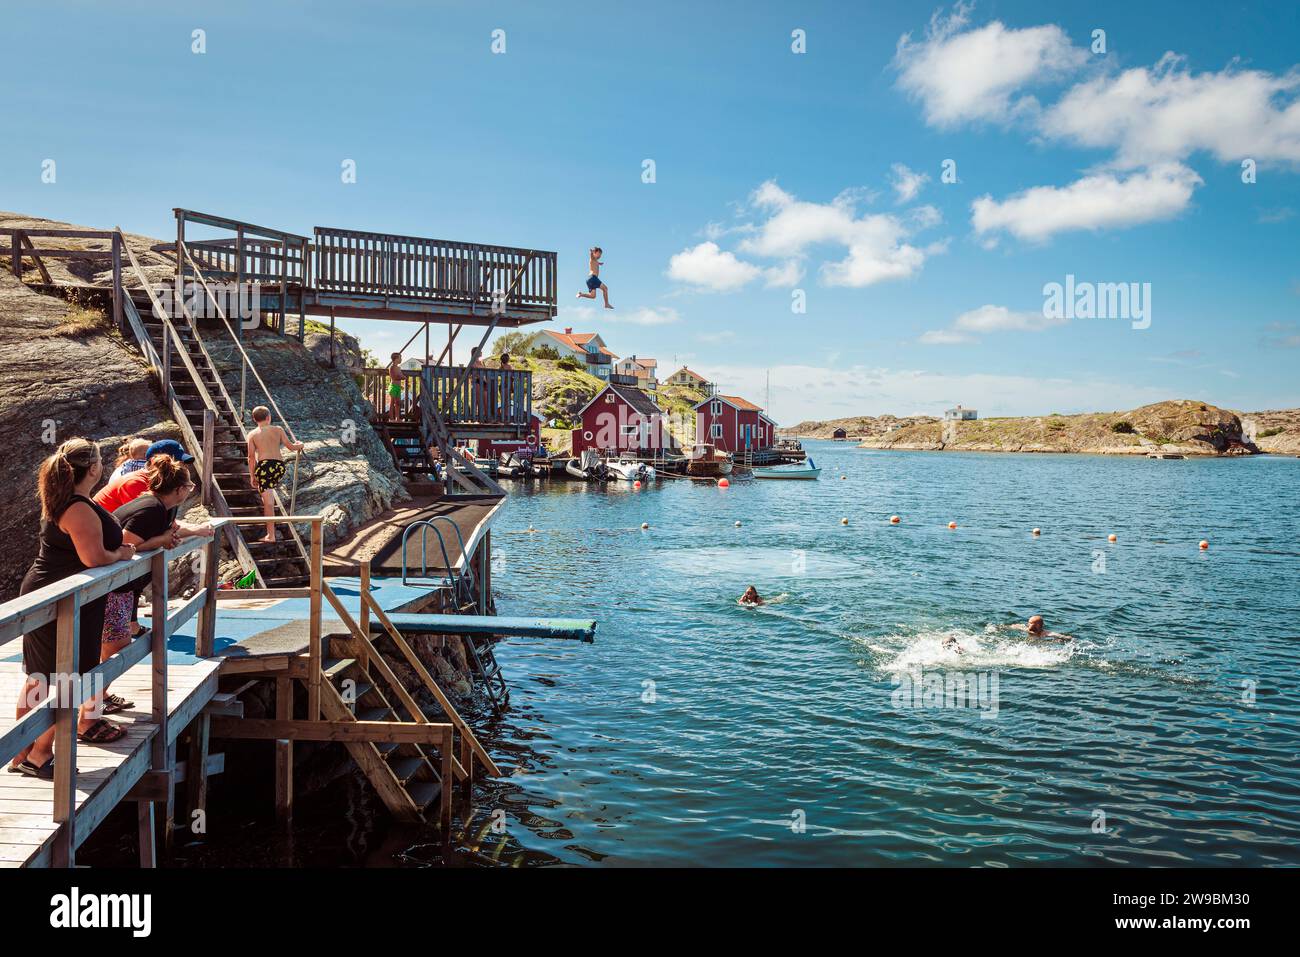 Children and teenagers jump from the high diving platform into the sea in the Stocken archipelago on the west coast of Sweden Stock Photo